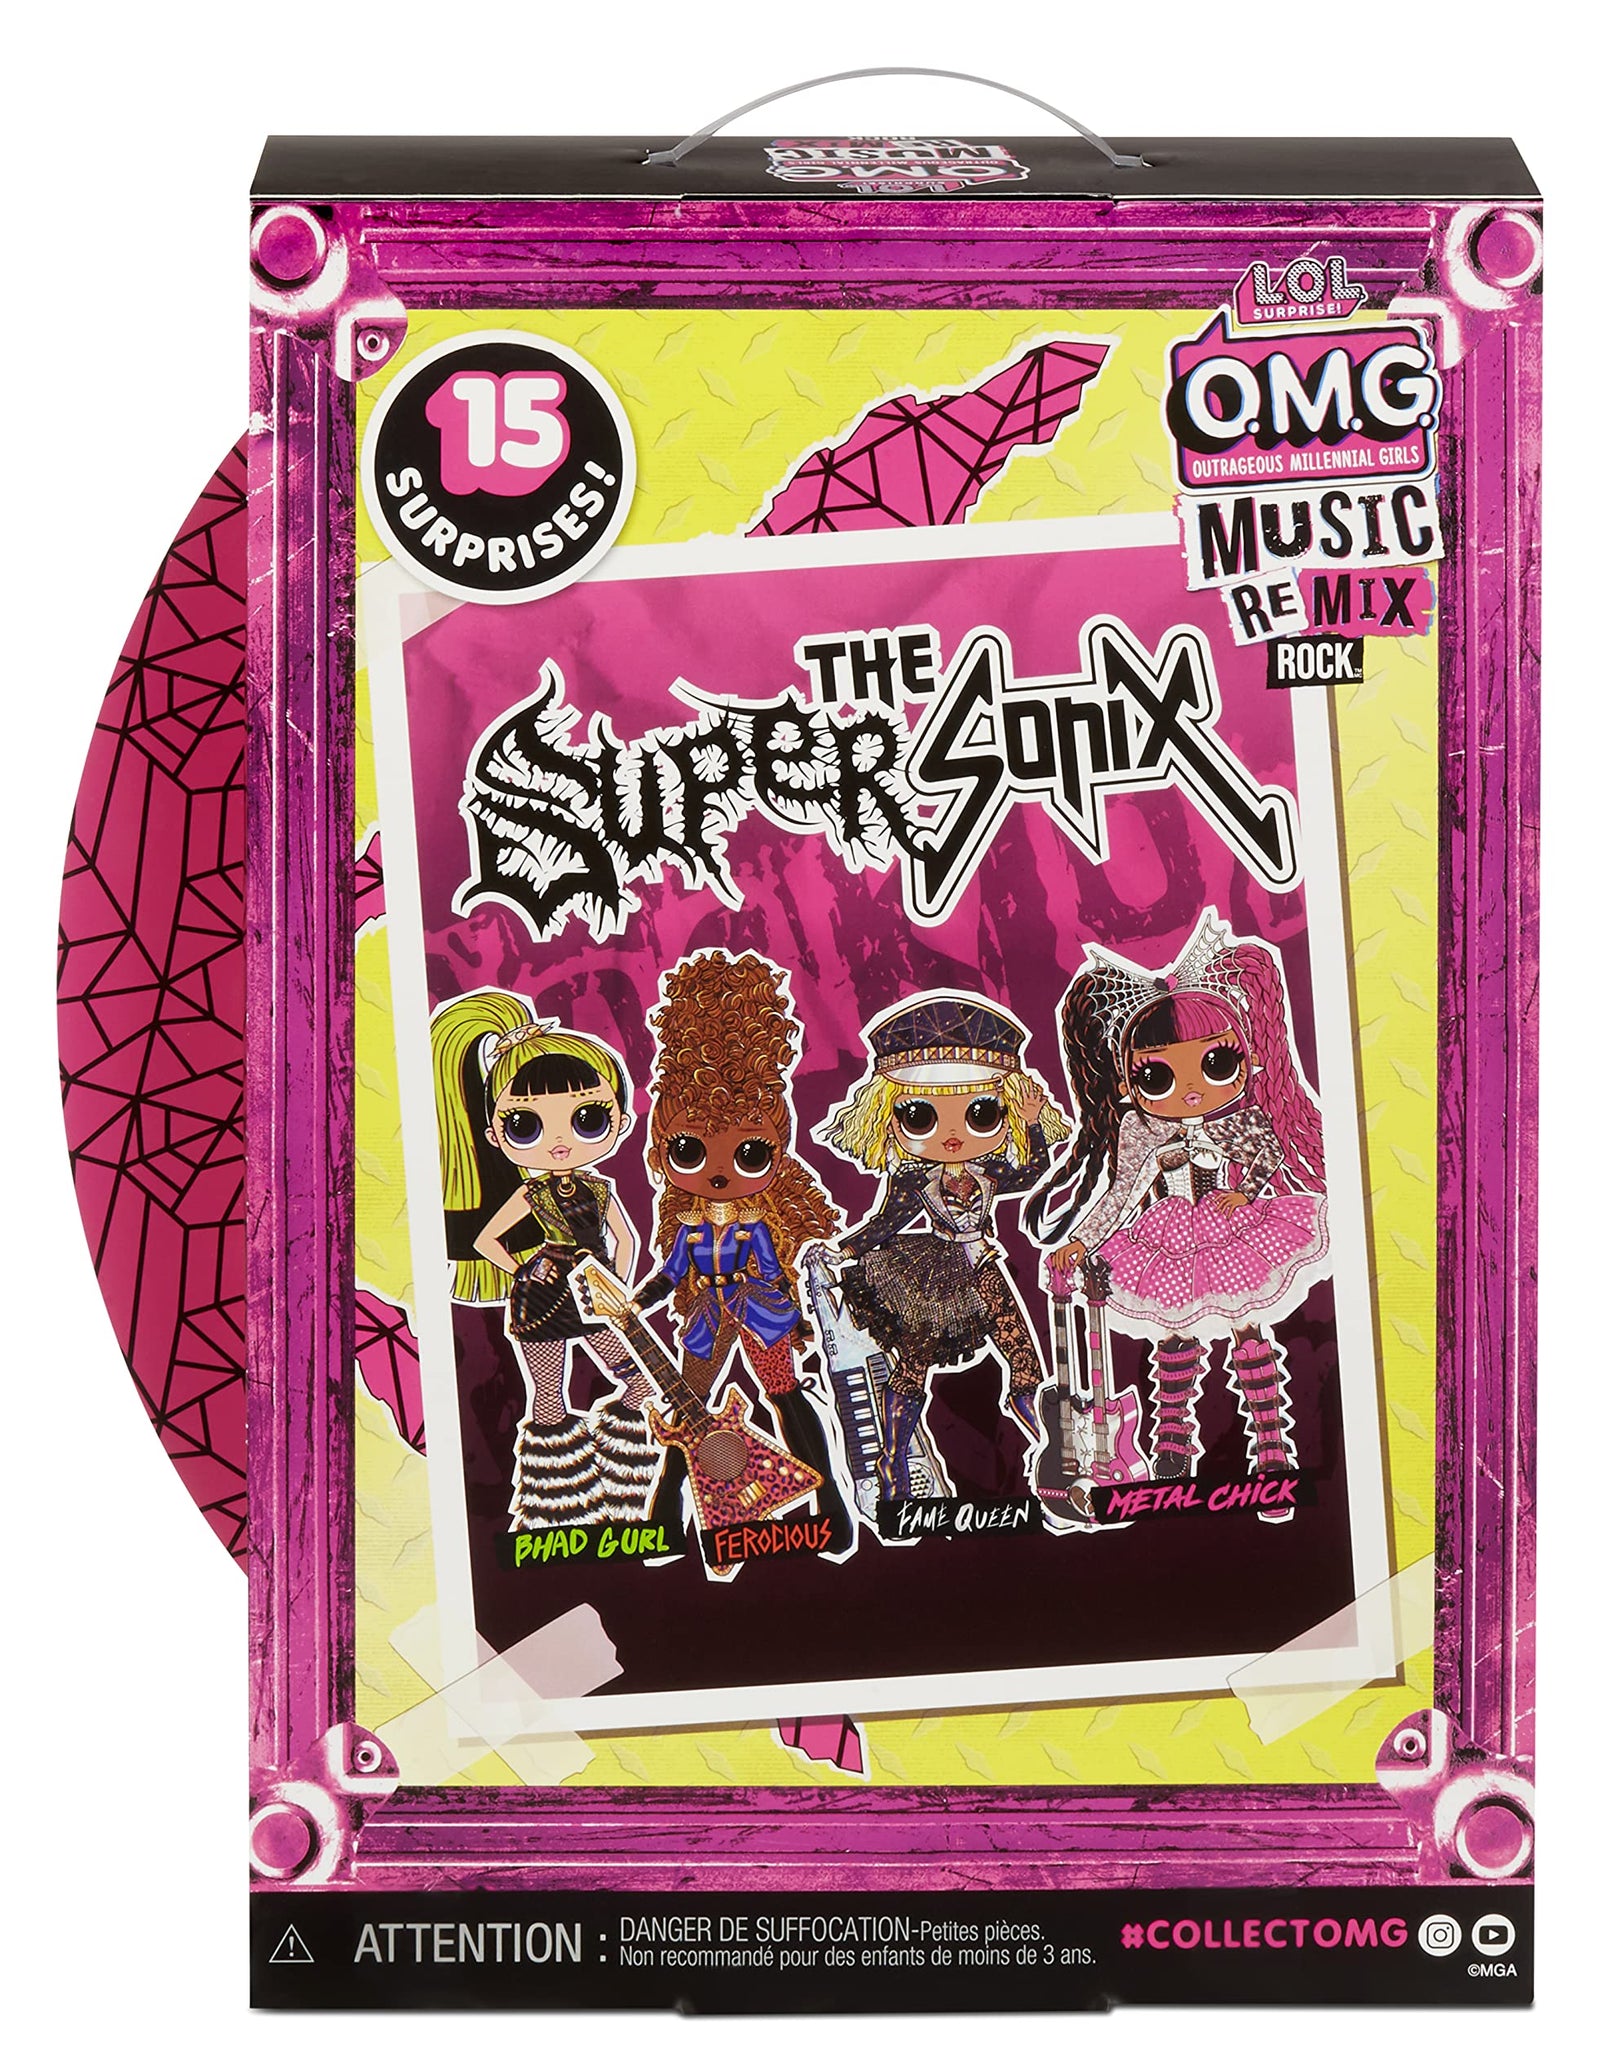 LOL Surprise OMG Remix Rock Metal Chick Fashion Doll with 15 Surprises Including Electric Guitar, Outfit, Shoes, Stand, Lyric Magazine & Record Player Playset- Gift Toys for Girls Boys Ages 4 5 6 7+